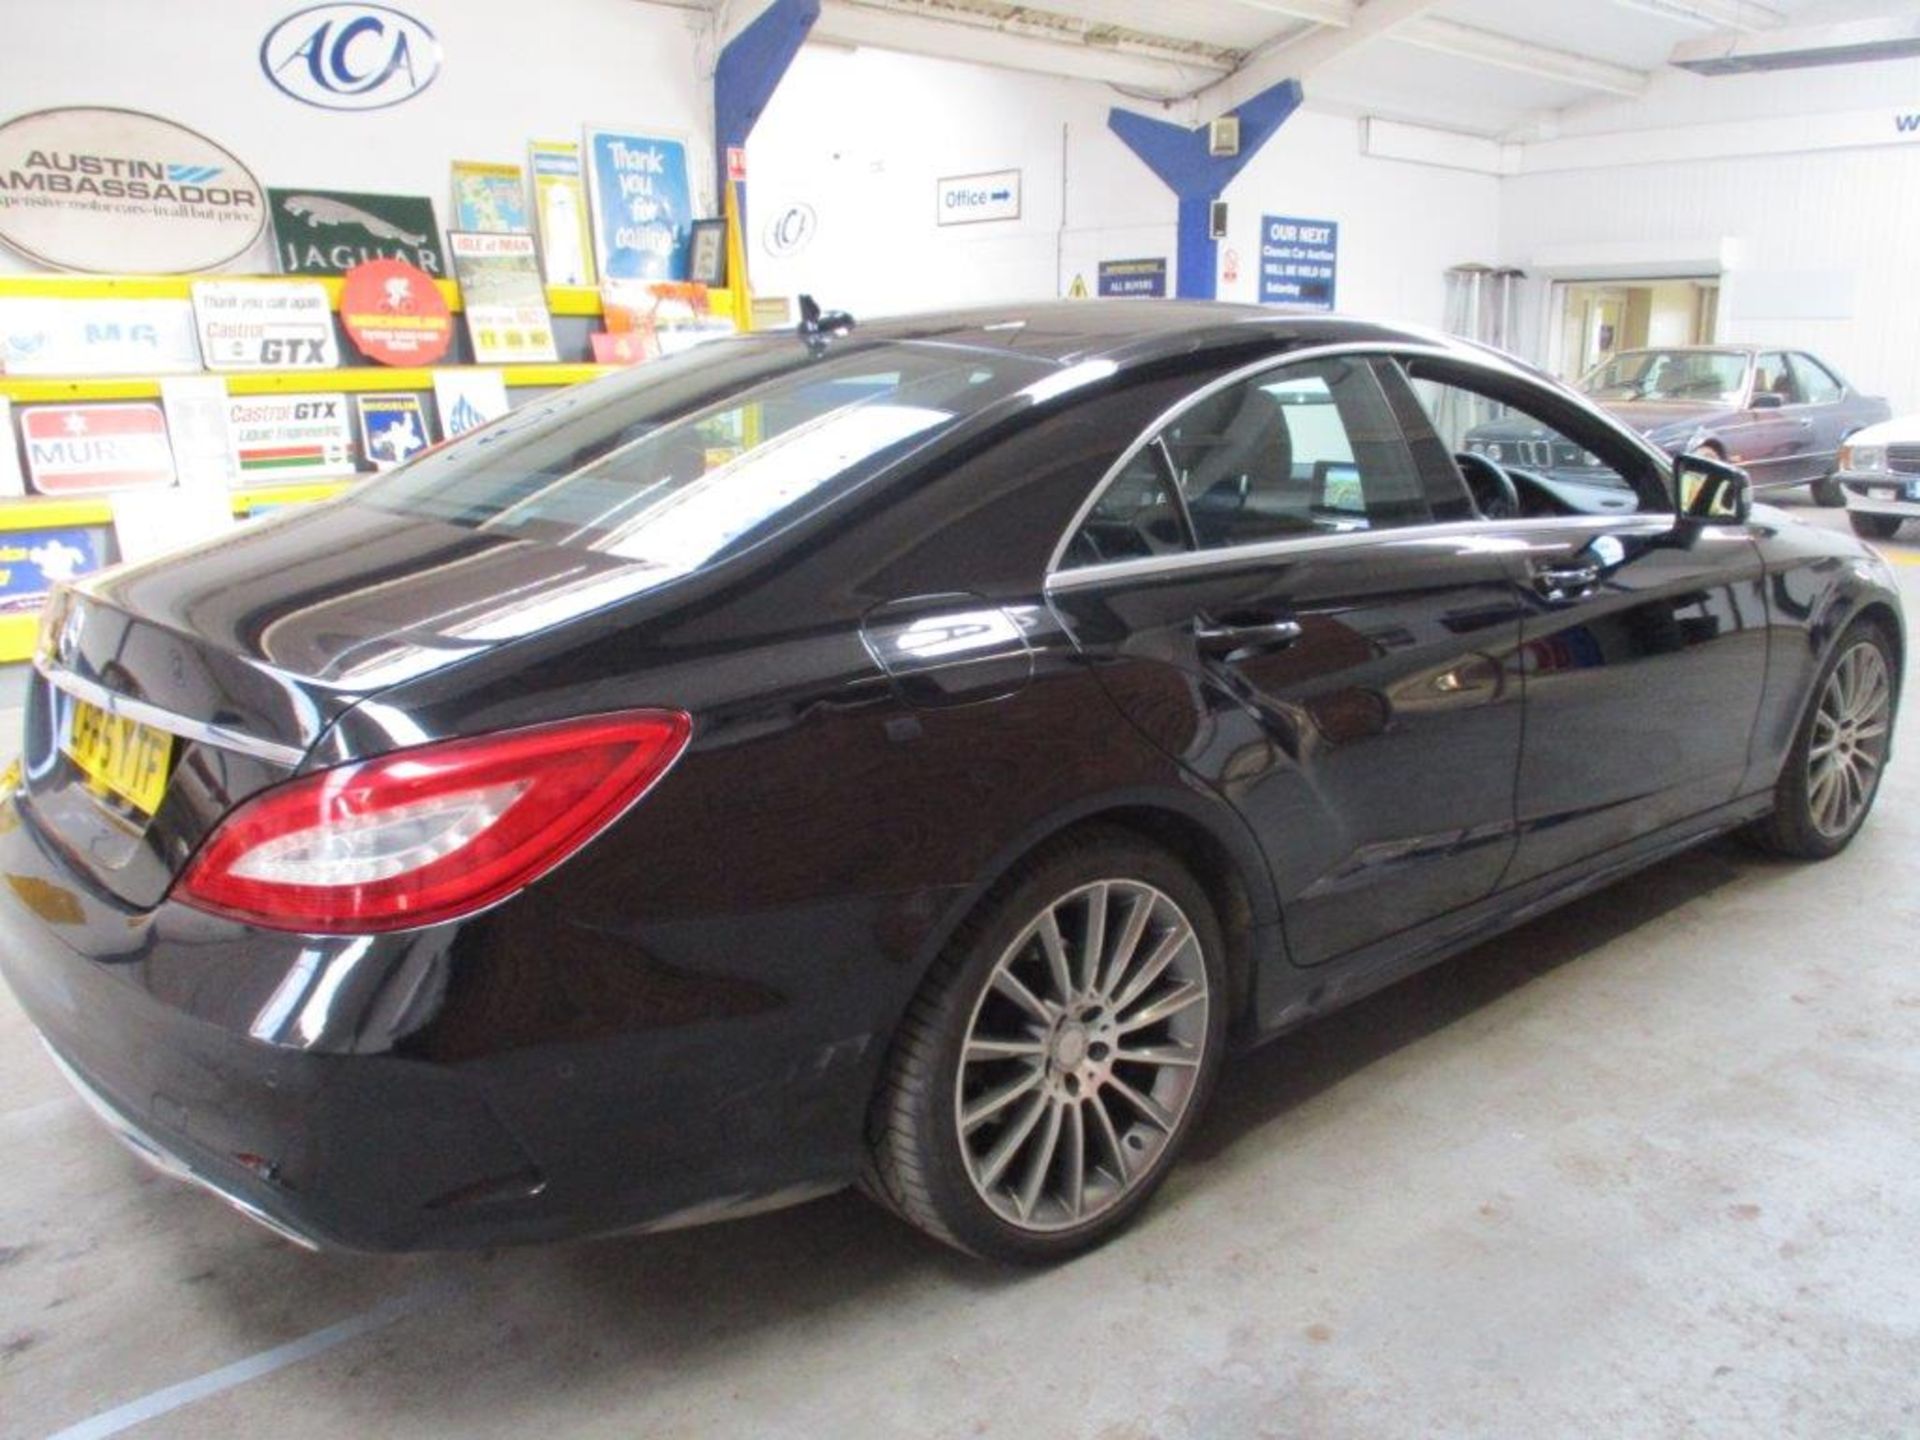 65 16 Mercedess CLS220 D AMG Line - Image 13 of 24